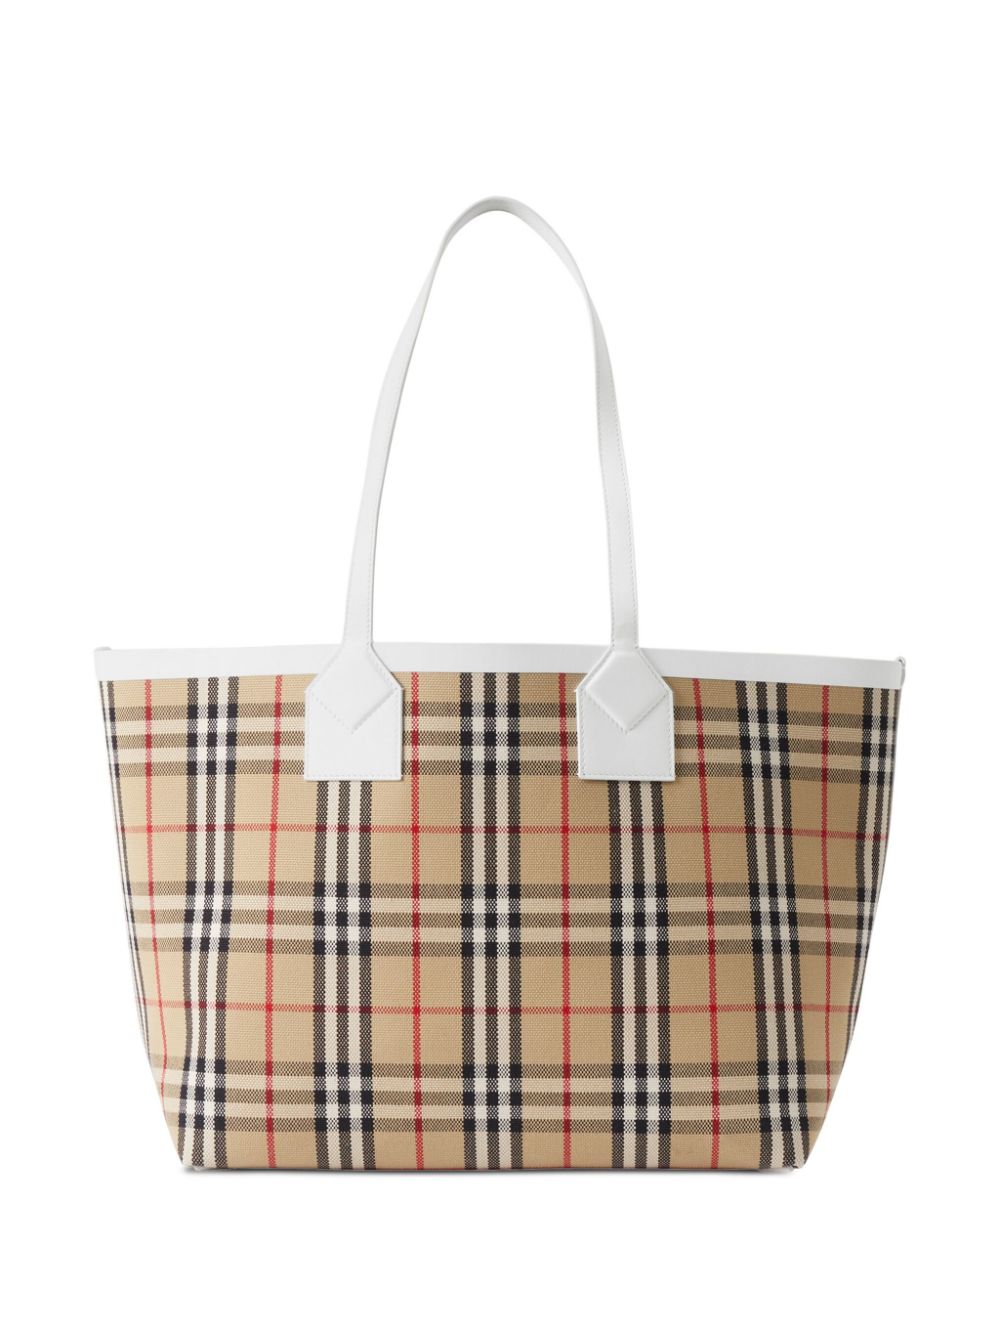 BURBERRY London Check Medium Tote with Zip Pouch in Tan